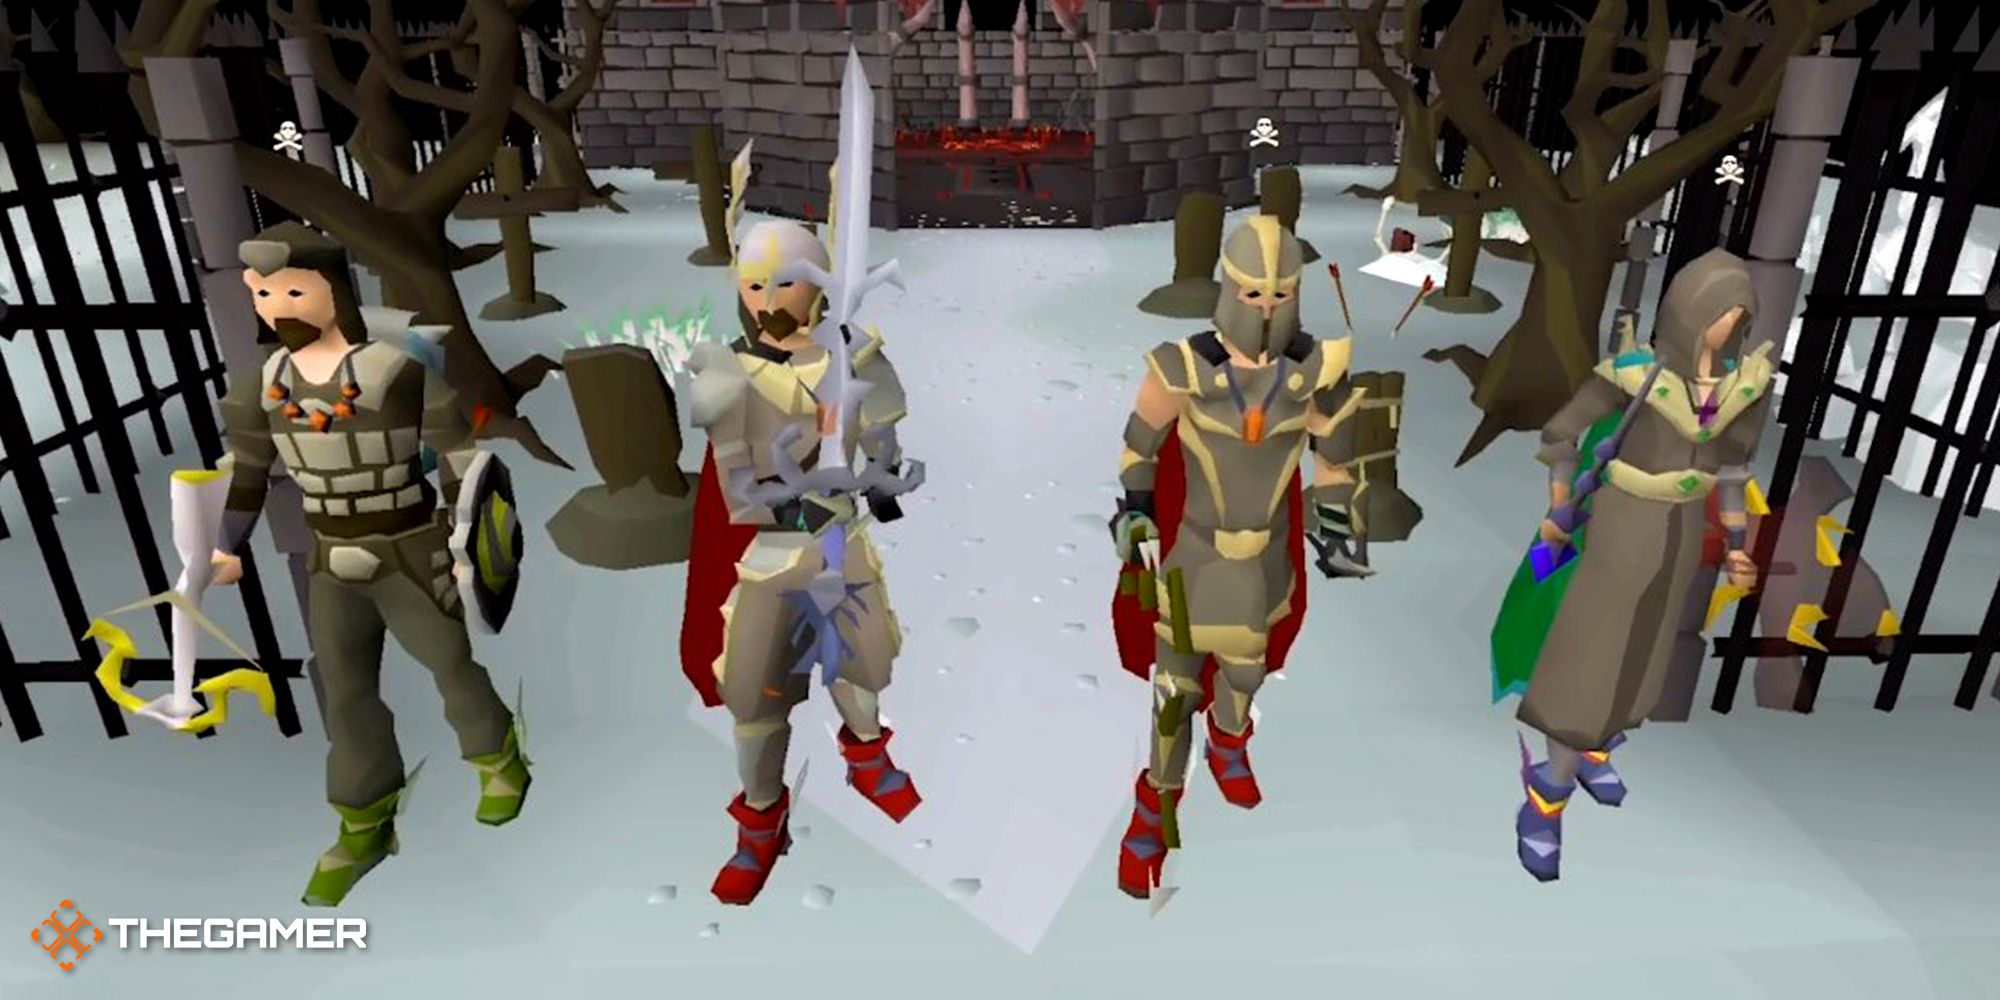 Runescape is set to receive its first new combat style in 2023